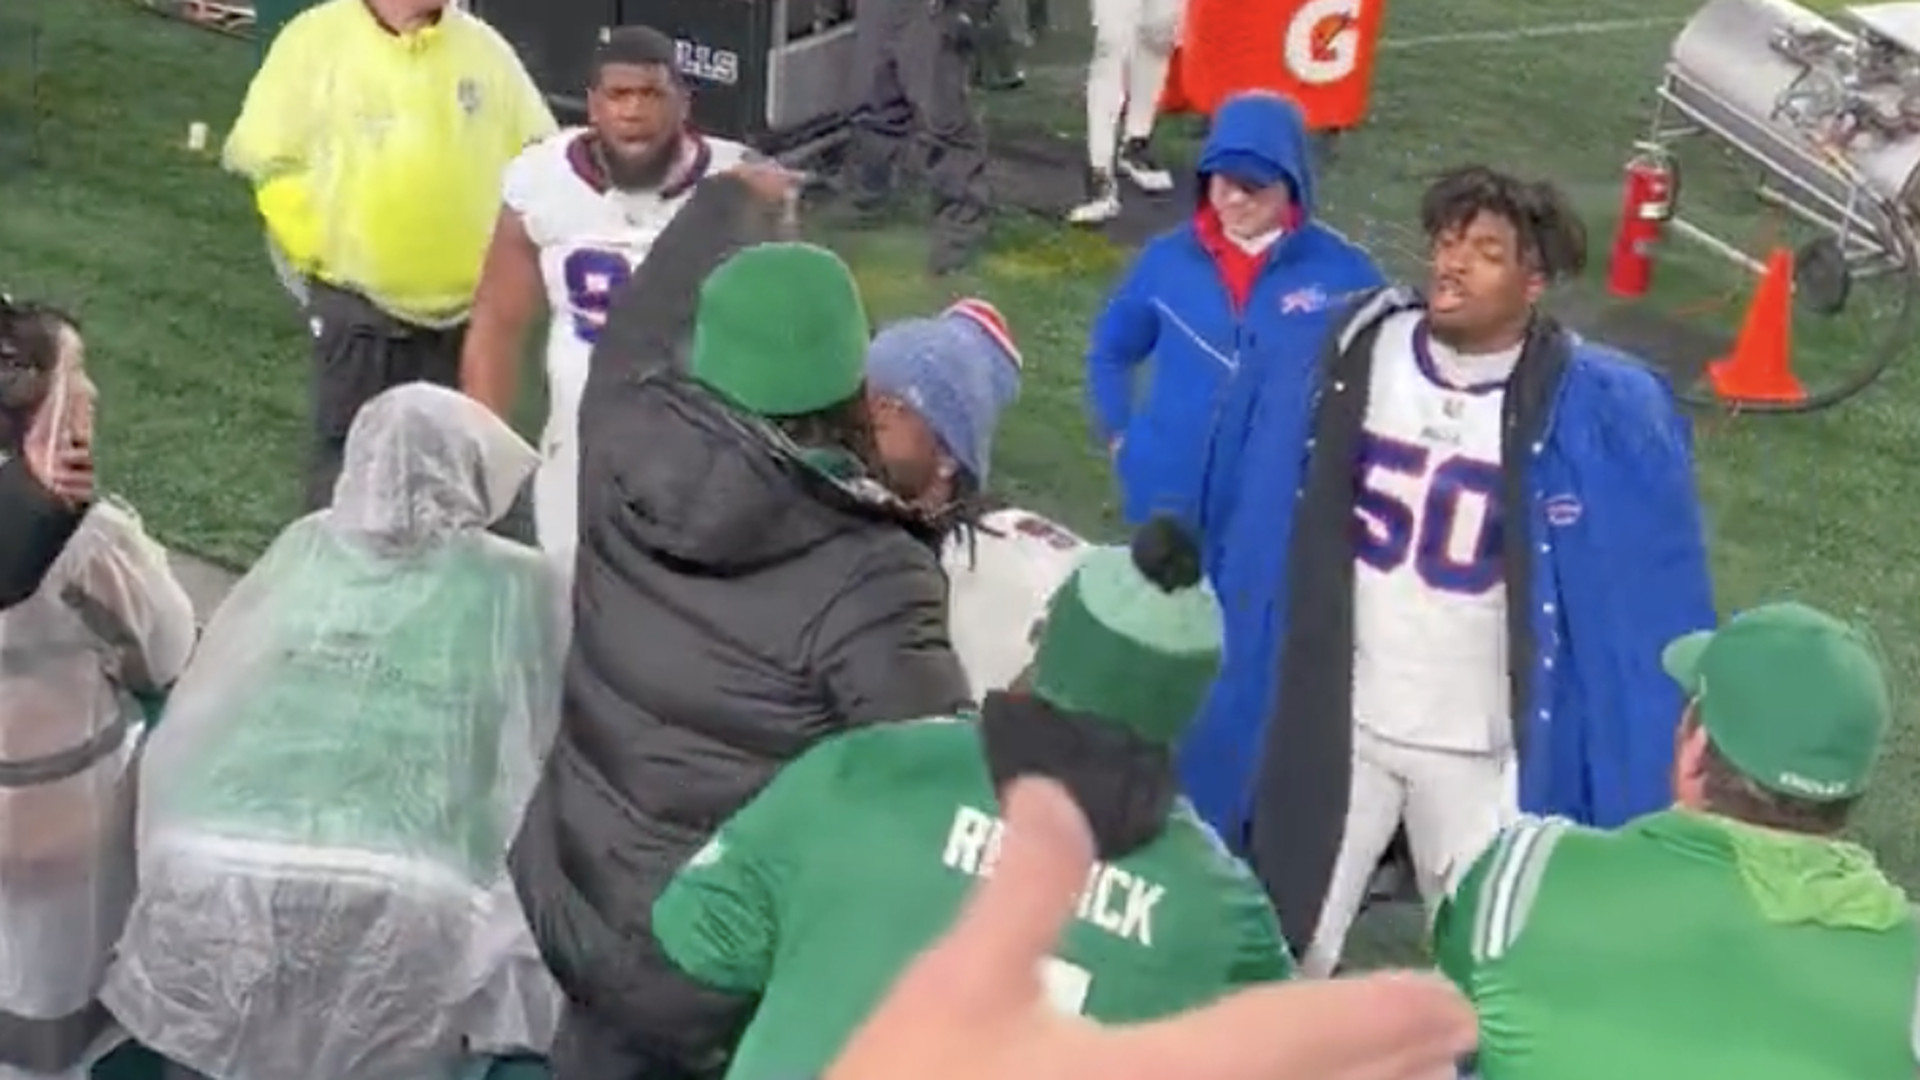 bills players confront eagles fans in stands after threats to families